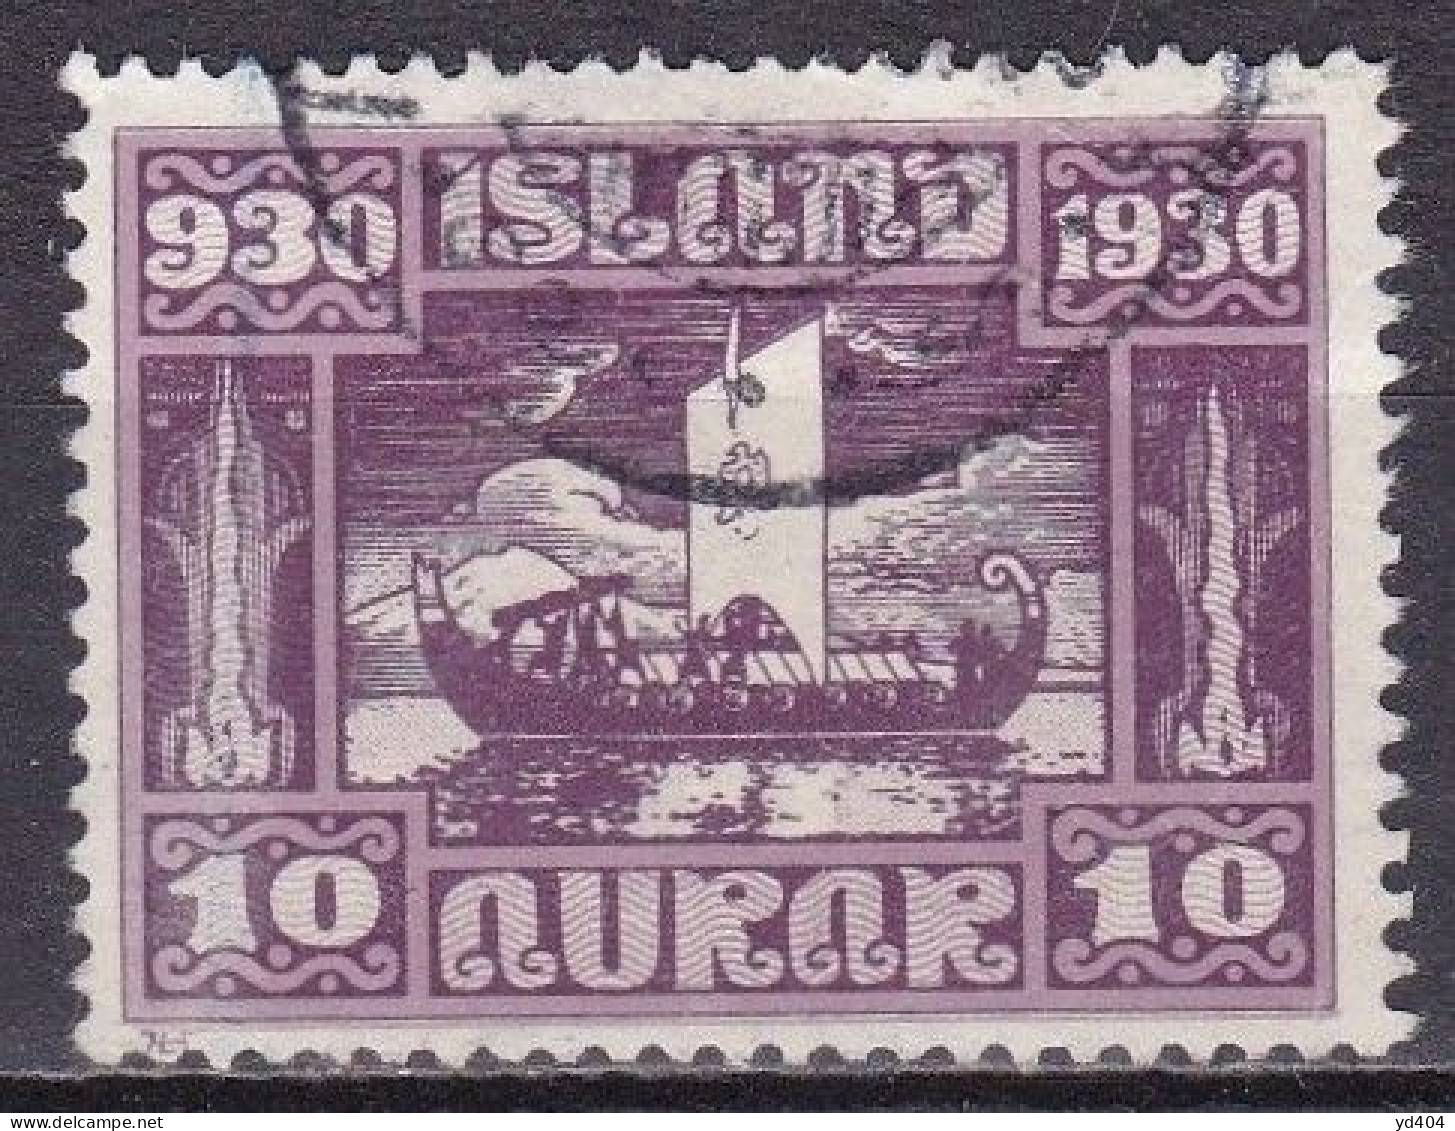 IS020D – ISLANDE – ICELAND – 1930 – MILLENARY OF THE ALTHING – SG # 161 USED 20 € - Gebraucht